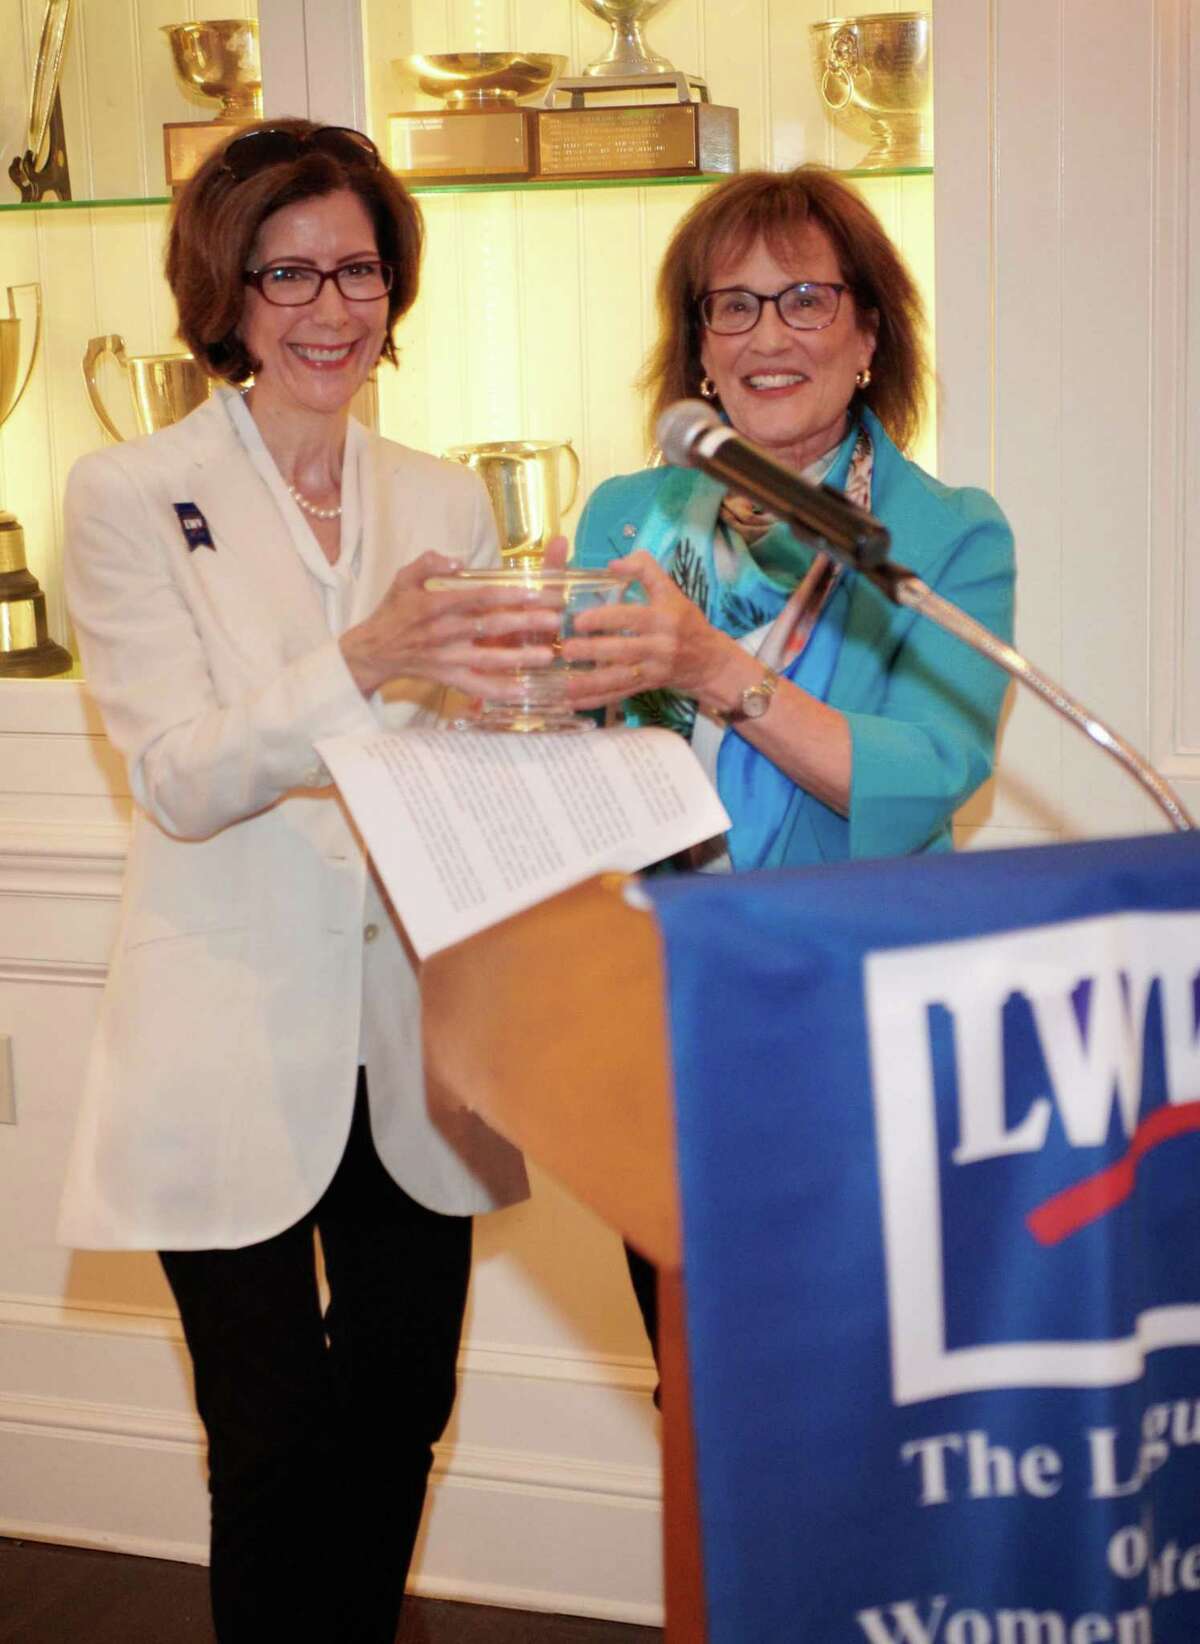 Deirdre Kamlani, at left is presented with the League of Women Voters of Greenwich’s Mary Award, for all of her work with the league by league member Nancy Duffy.